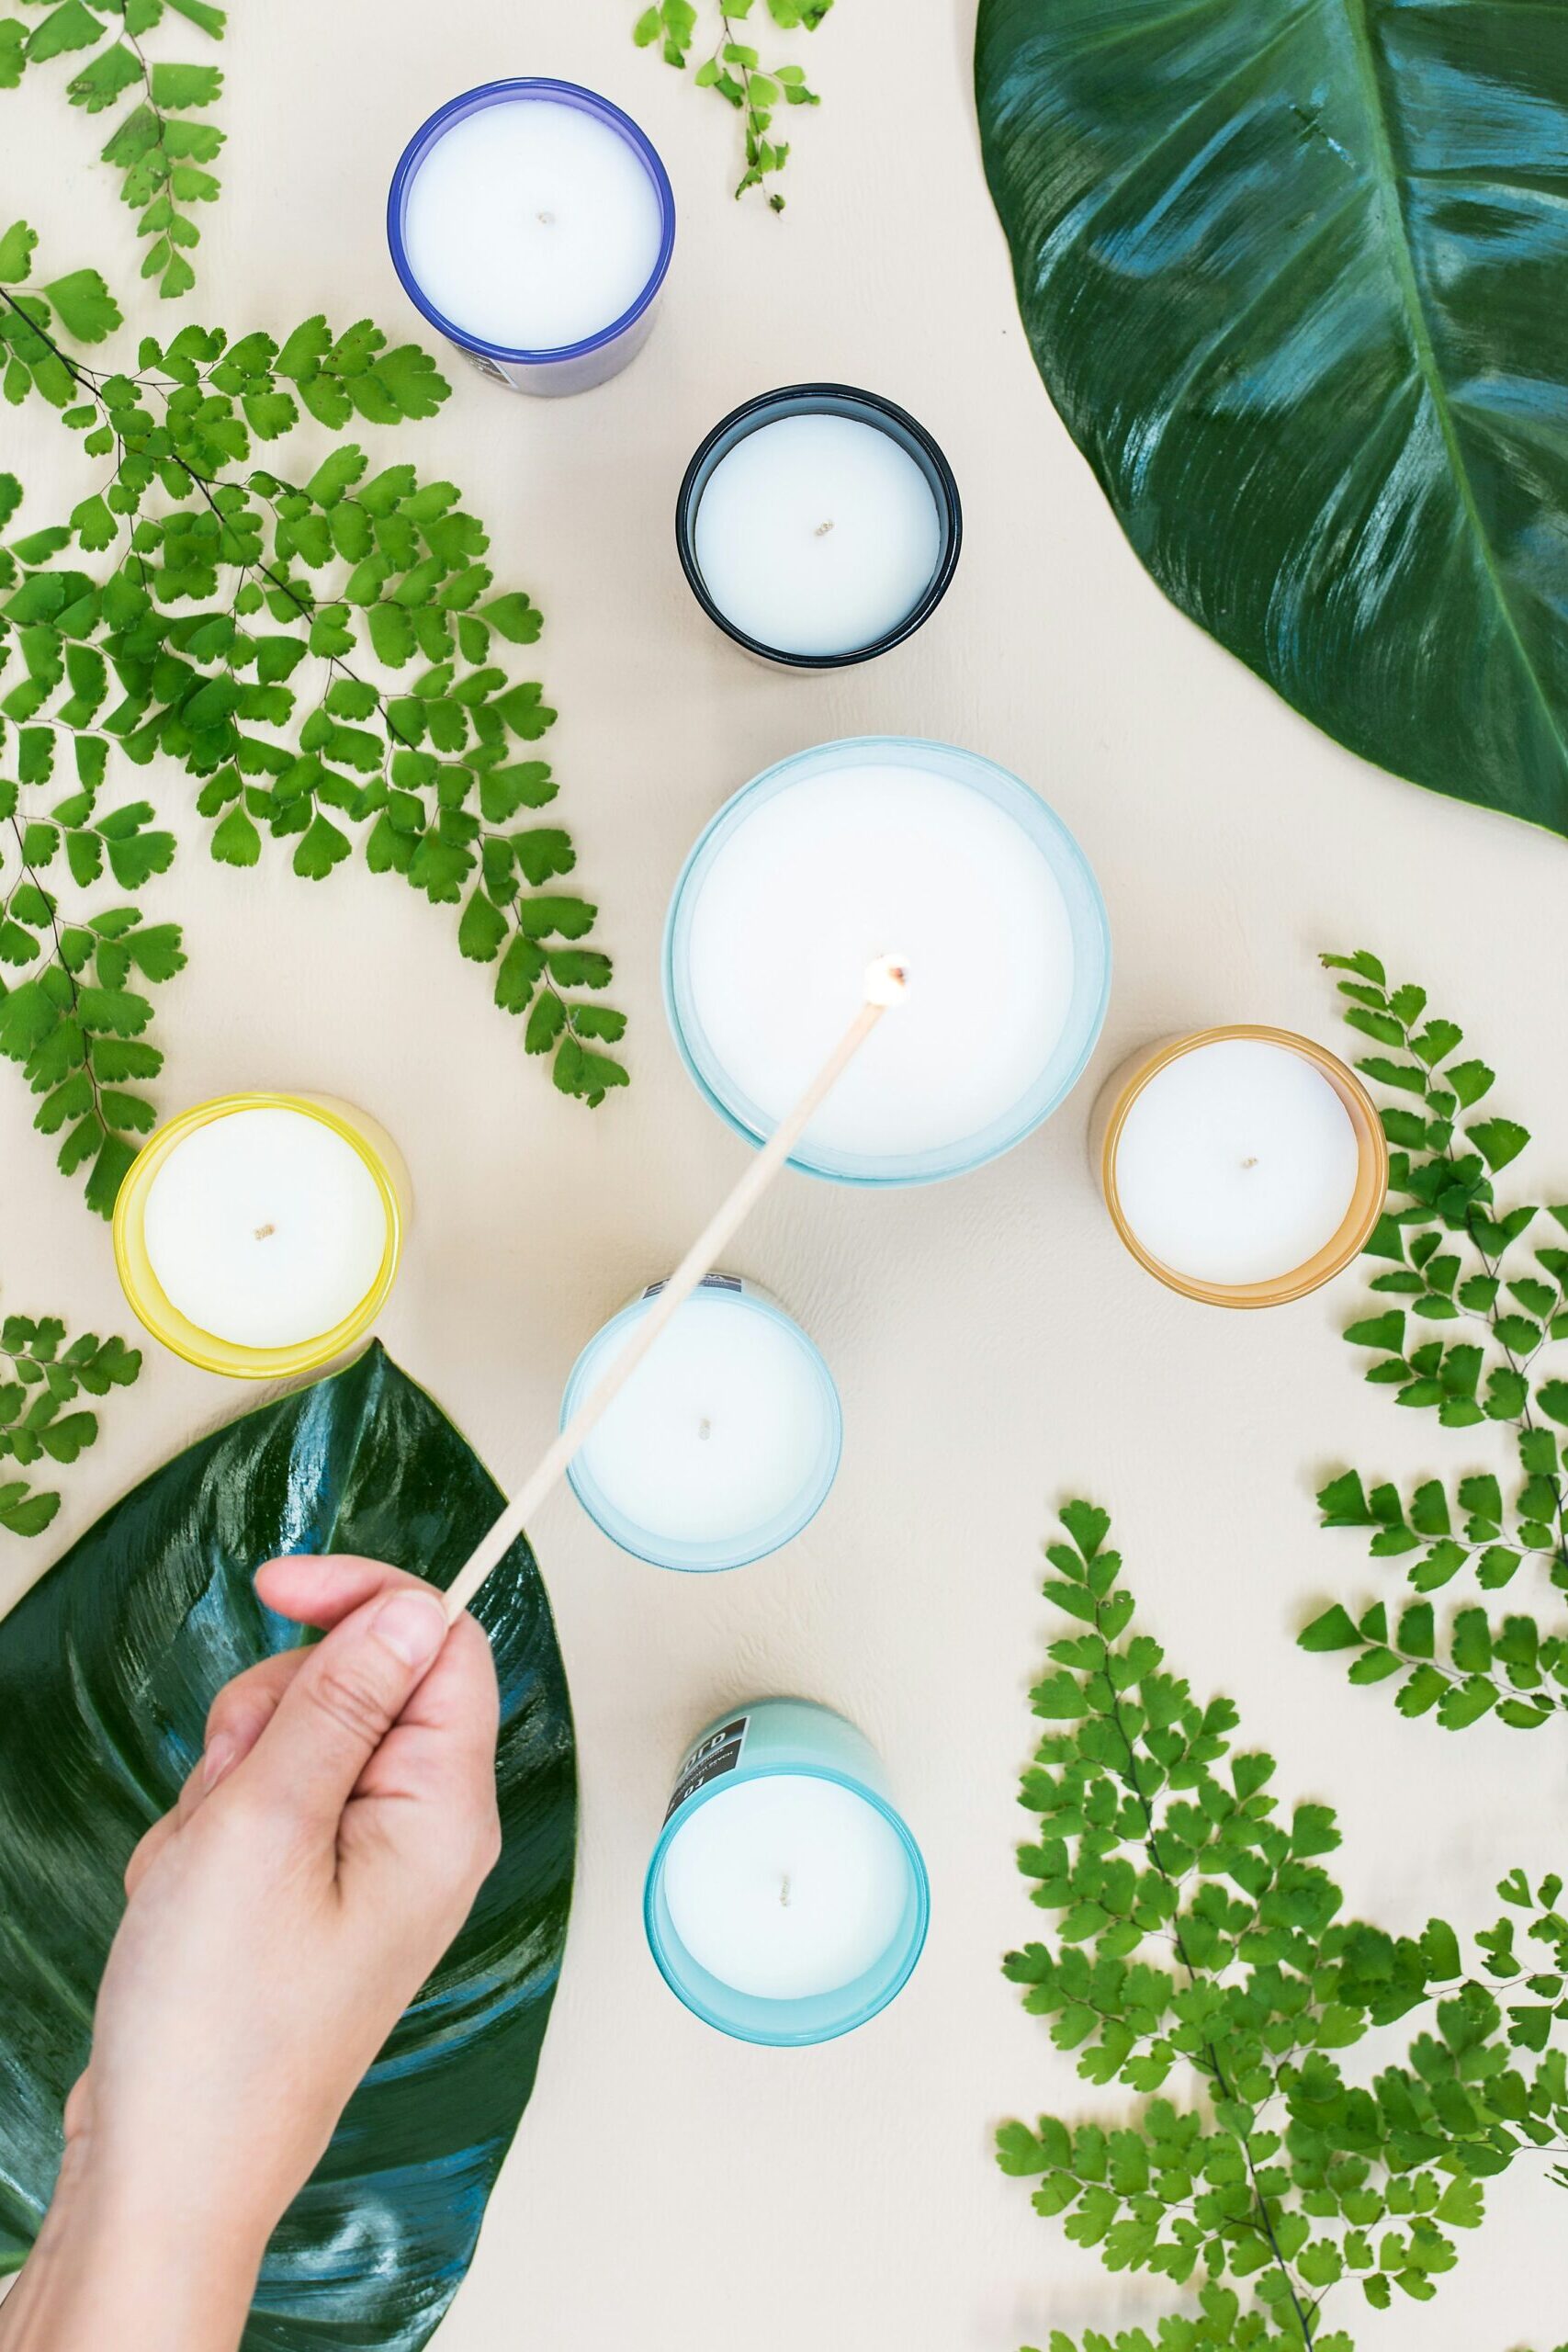 We have handpicked Amazon's best selling candles to help you relax and unwind.